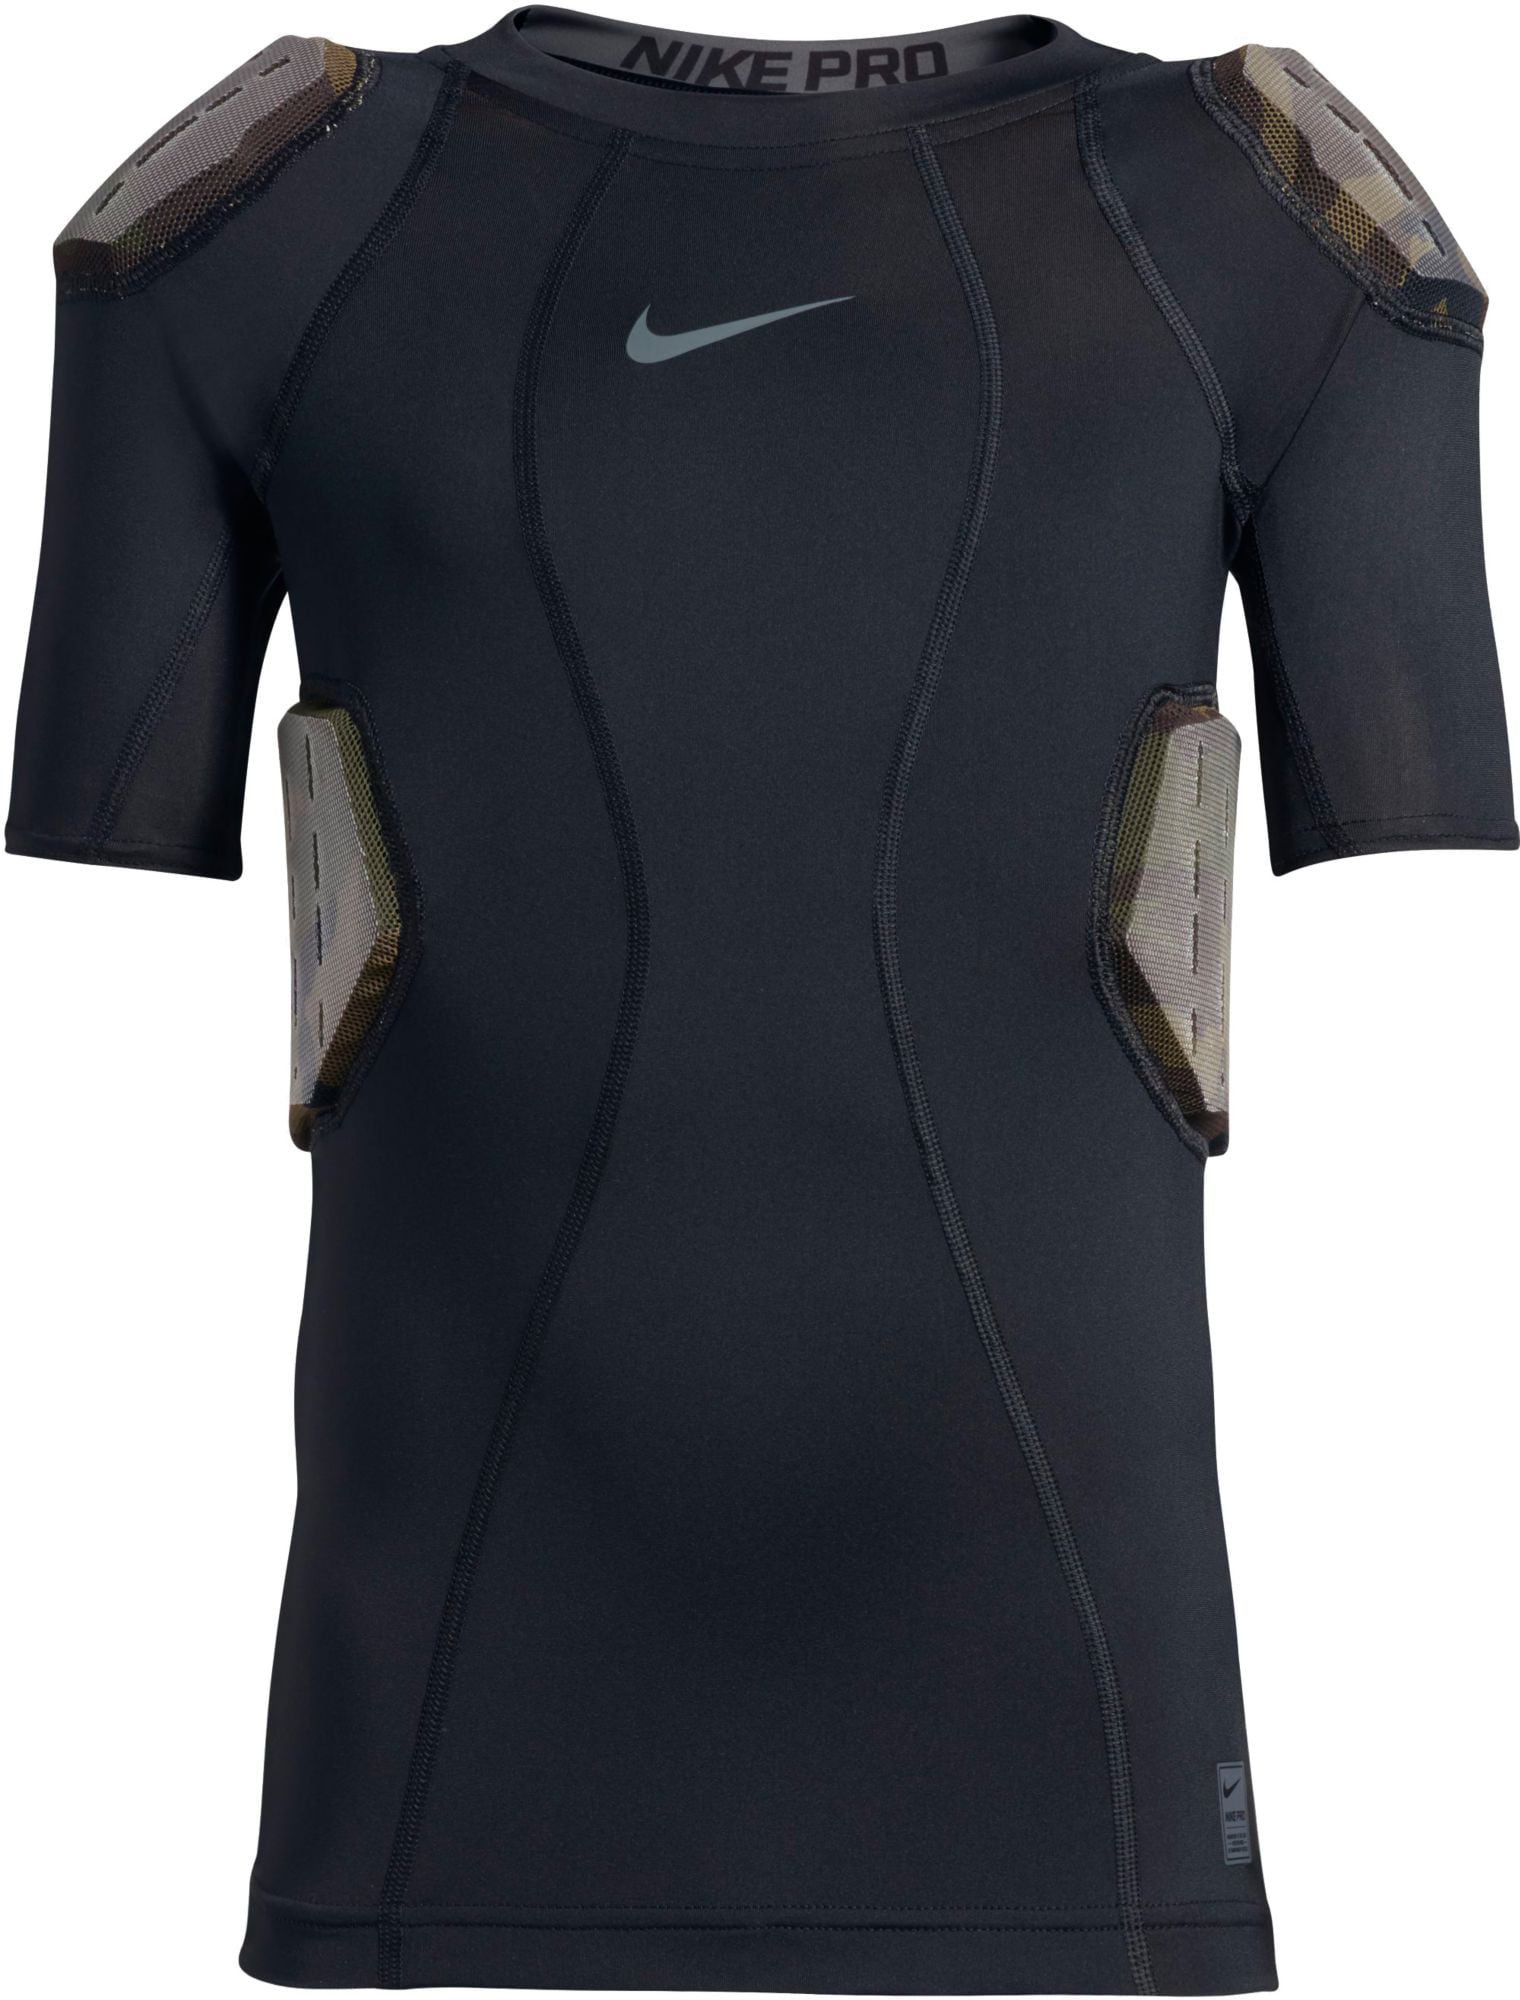 NIKE PRO COMBAT Hyperstrong Men's 4-Pad Top Compression Foorball